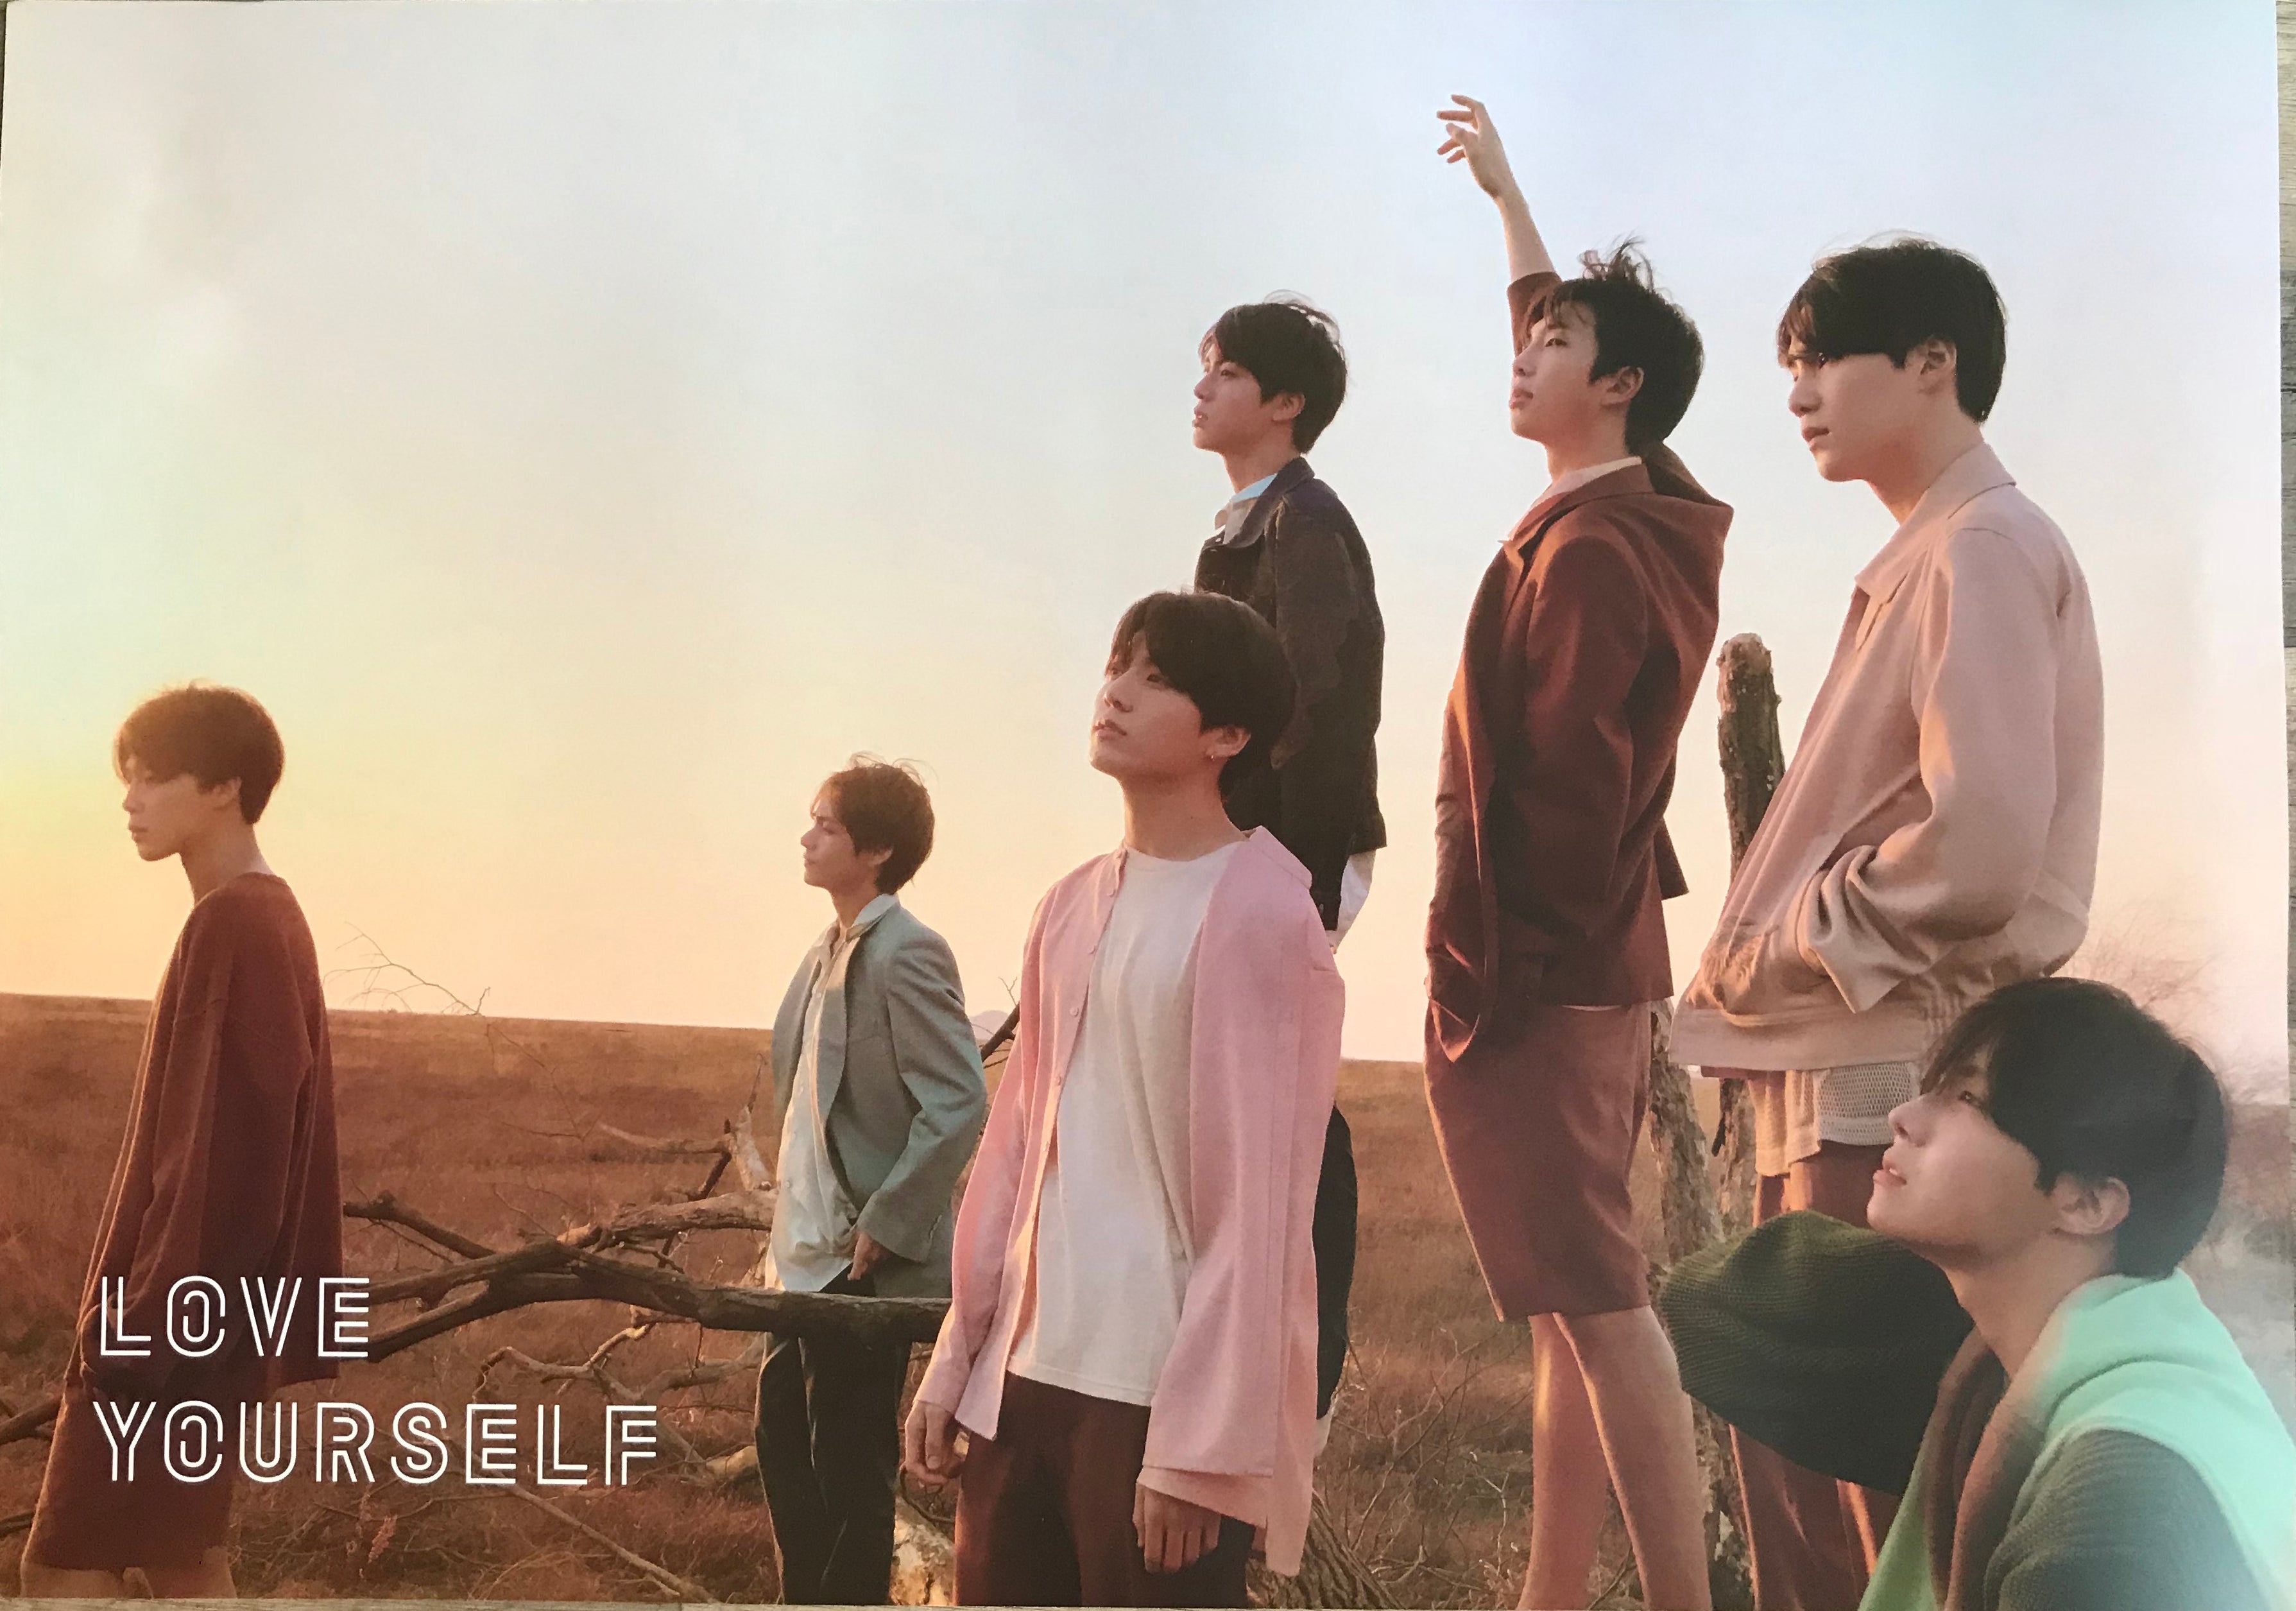 Official　Concept　Y　BTS　Poster　Tear　Music　Love　Yourself　Choice　Photo　–　LA